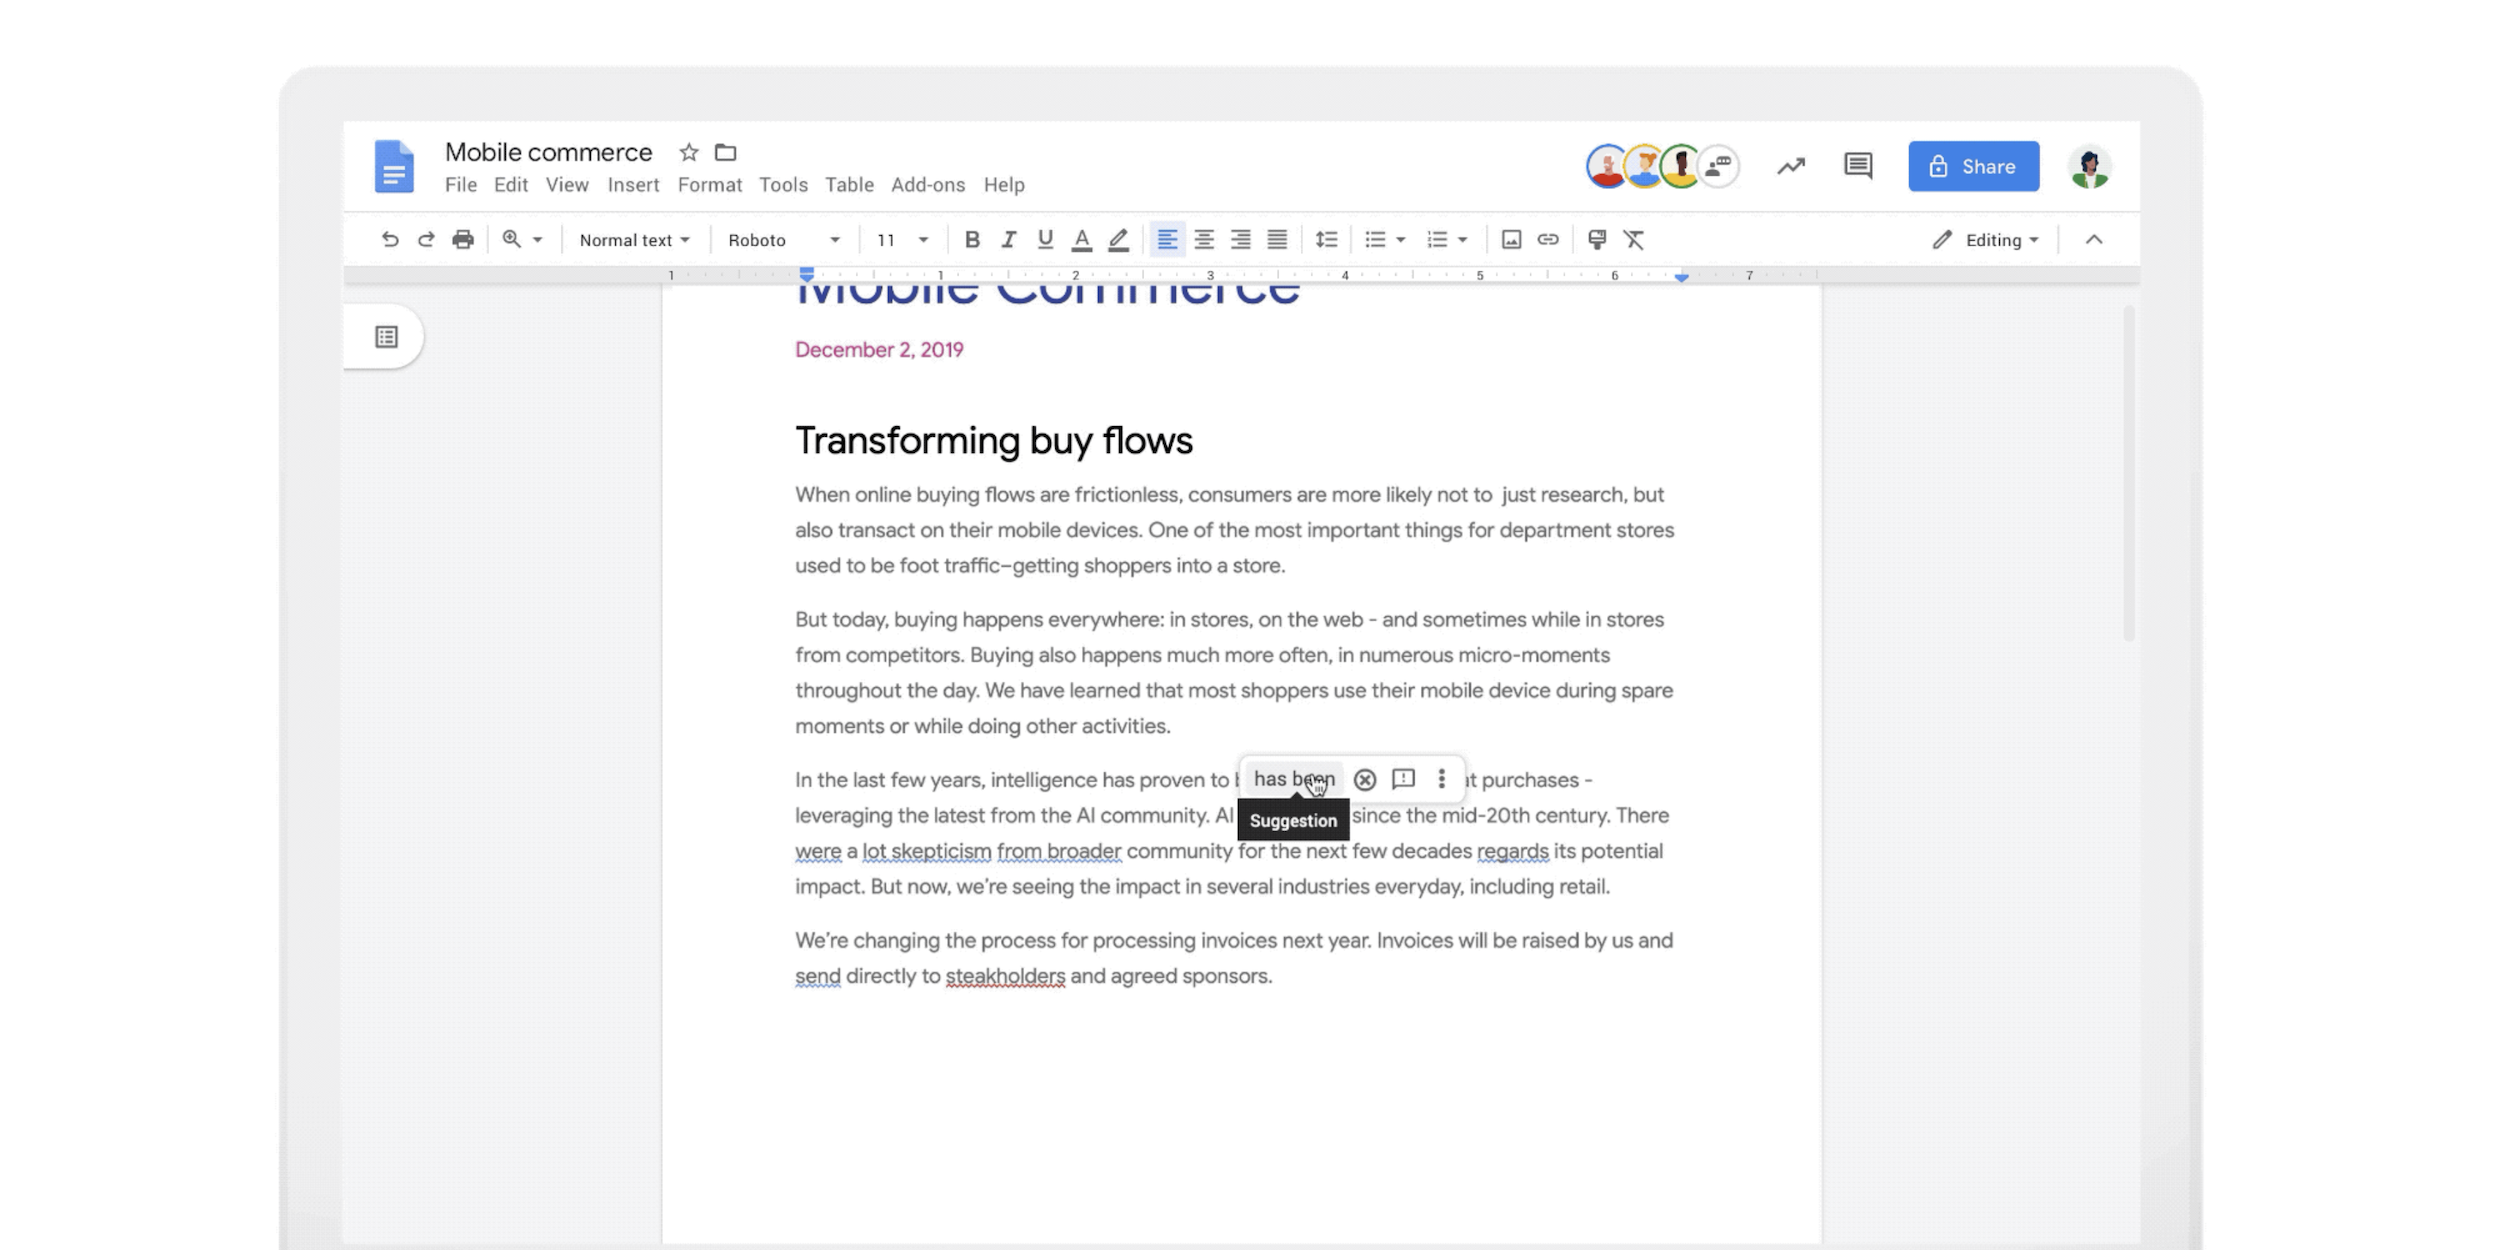 How to check grammar in google docs